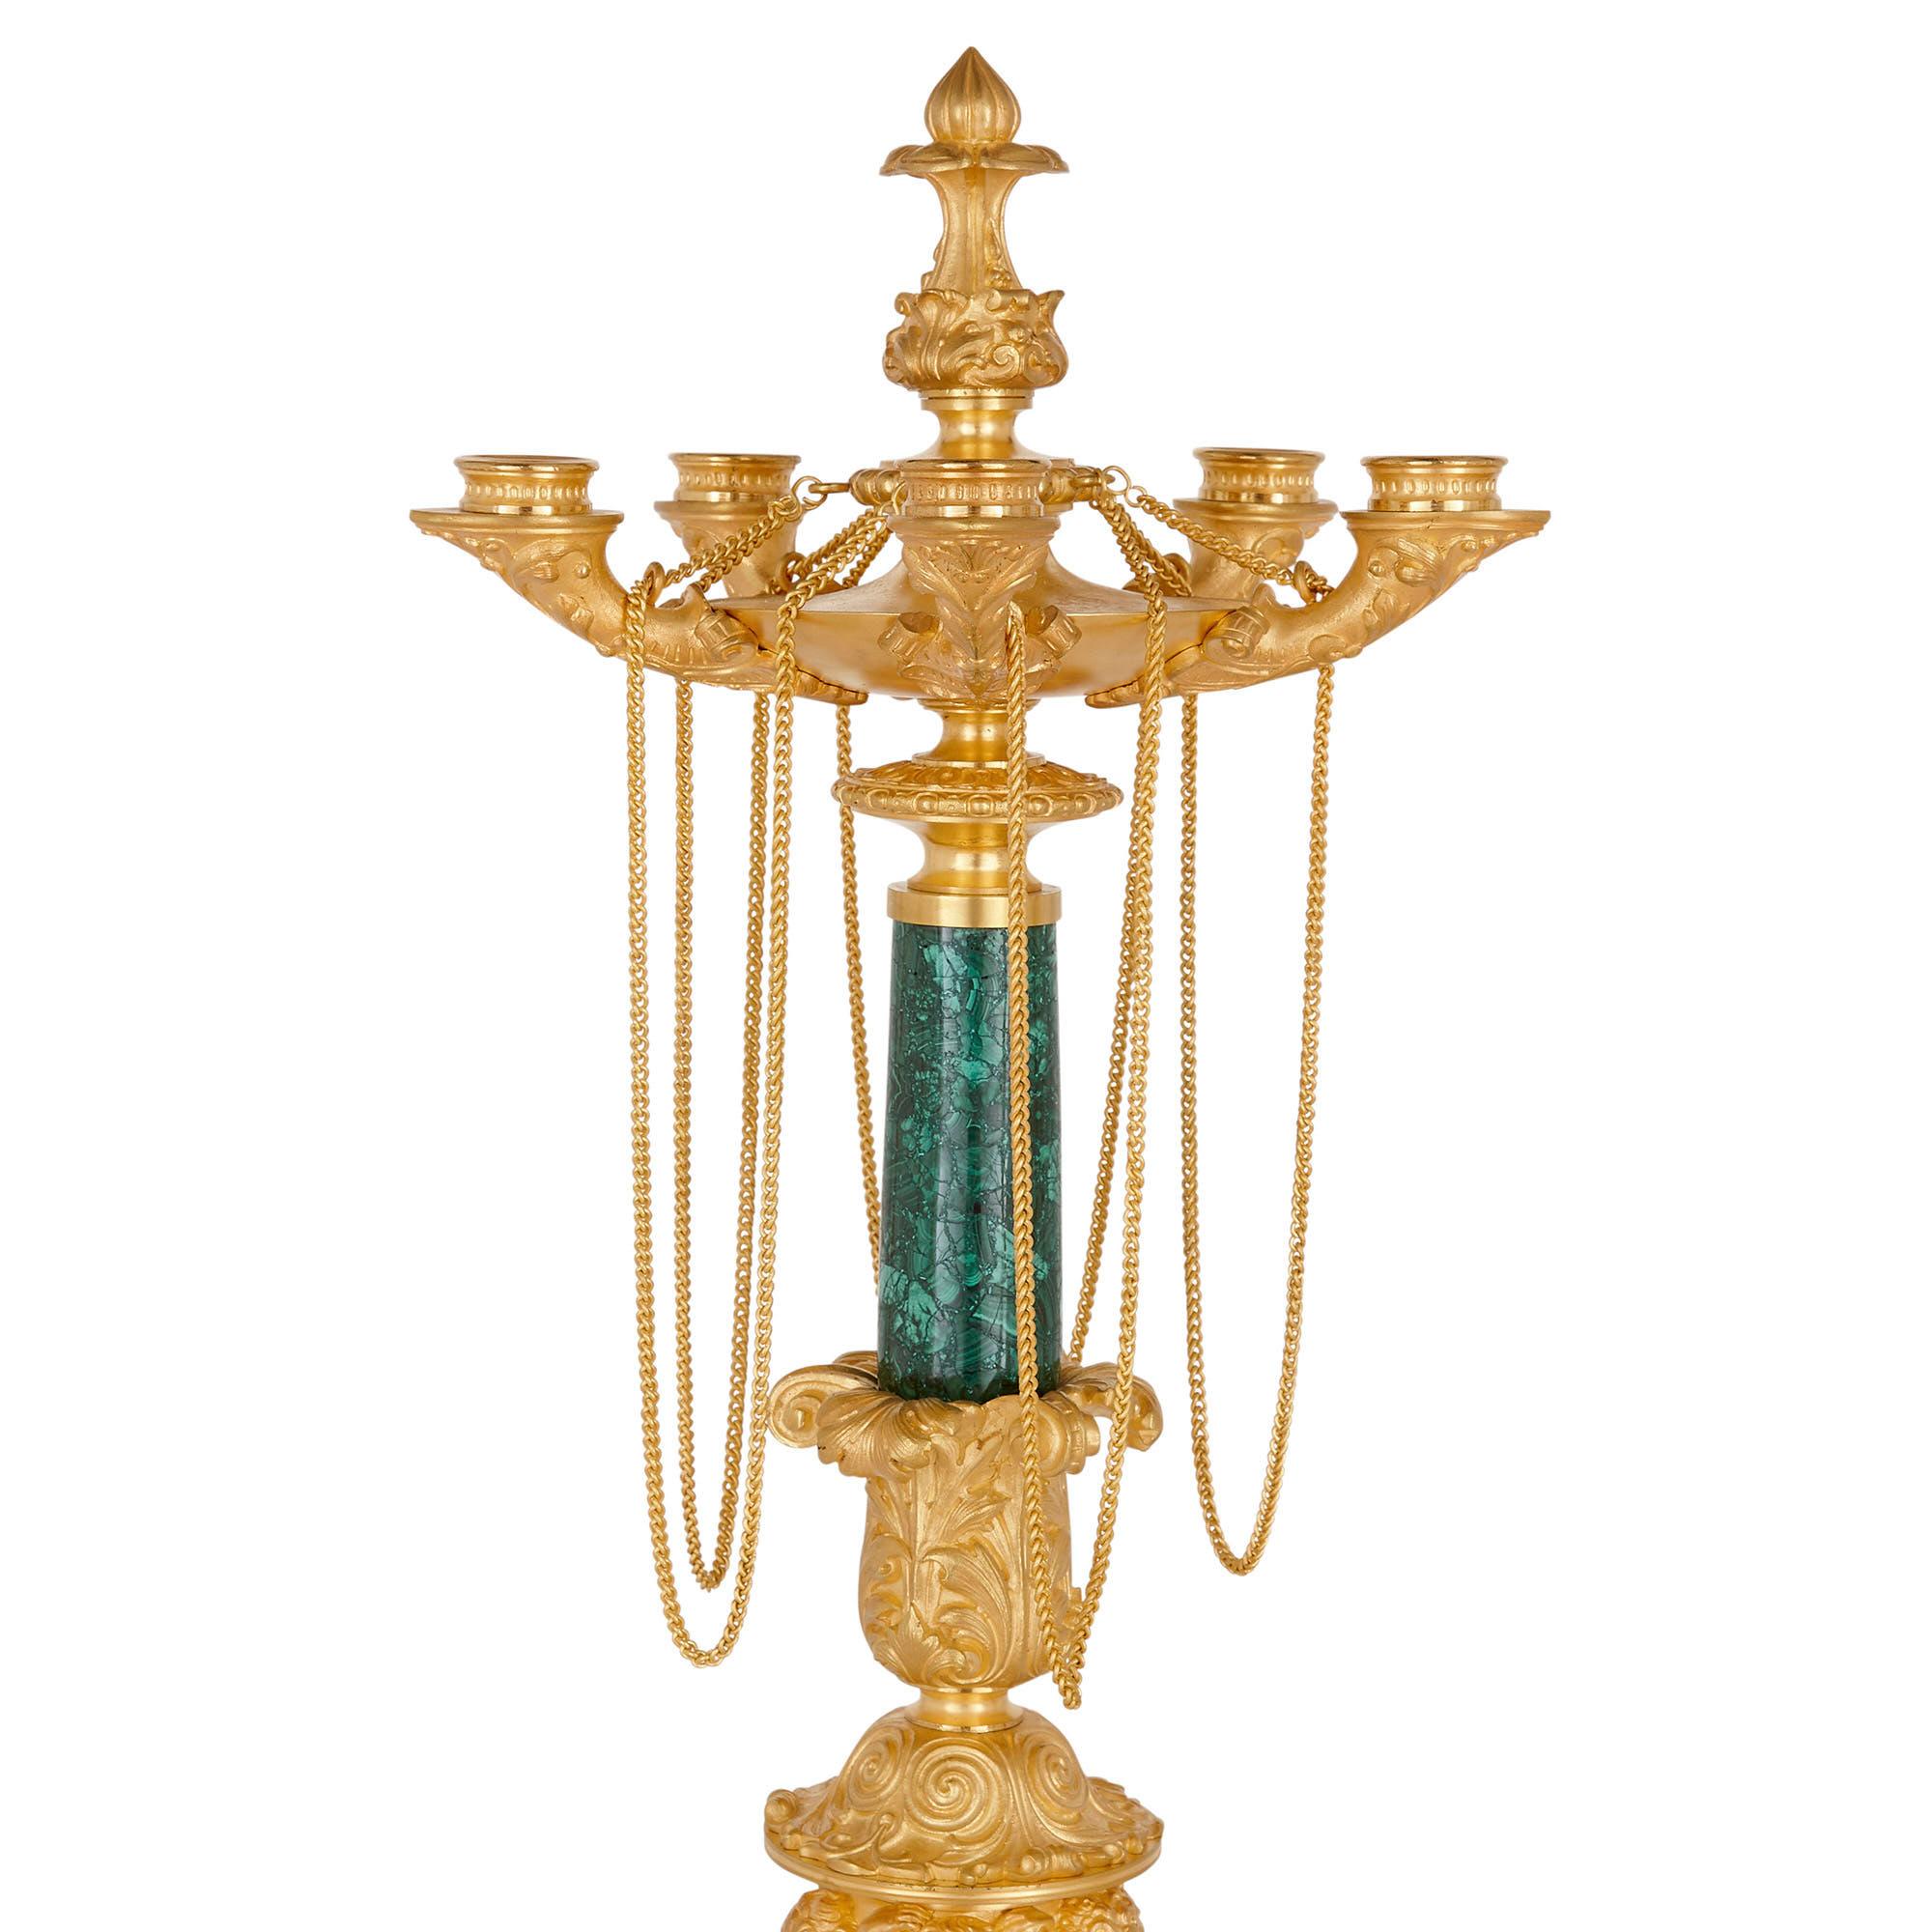 Two neoclassical early 19th century malachite and gilt bronze candelabra
French, circa 1830
Dimensions: Height 68cm, diameter 25cm

This superb pair of Charles X period candelabra is designed in the distinct Neoclassical style, crafted from